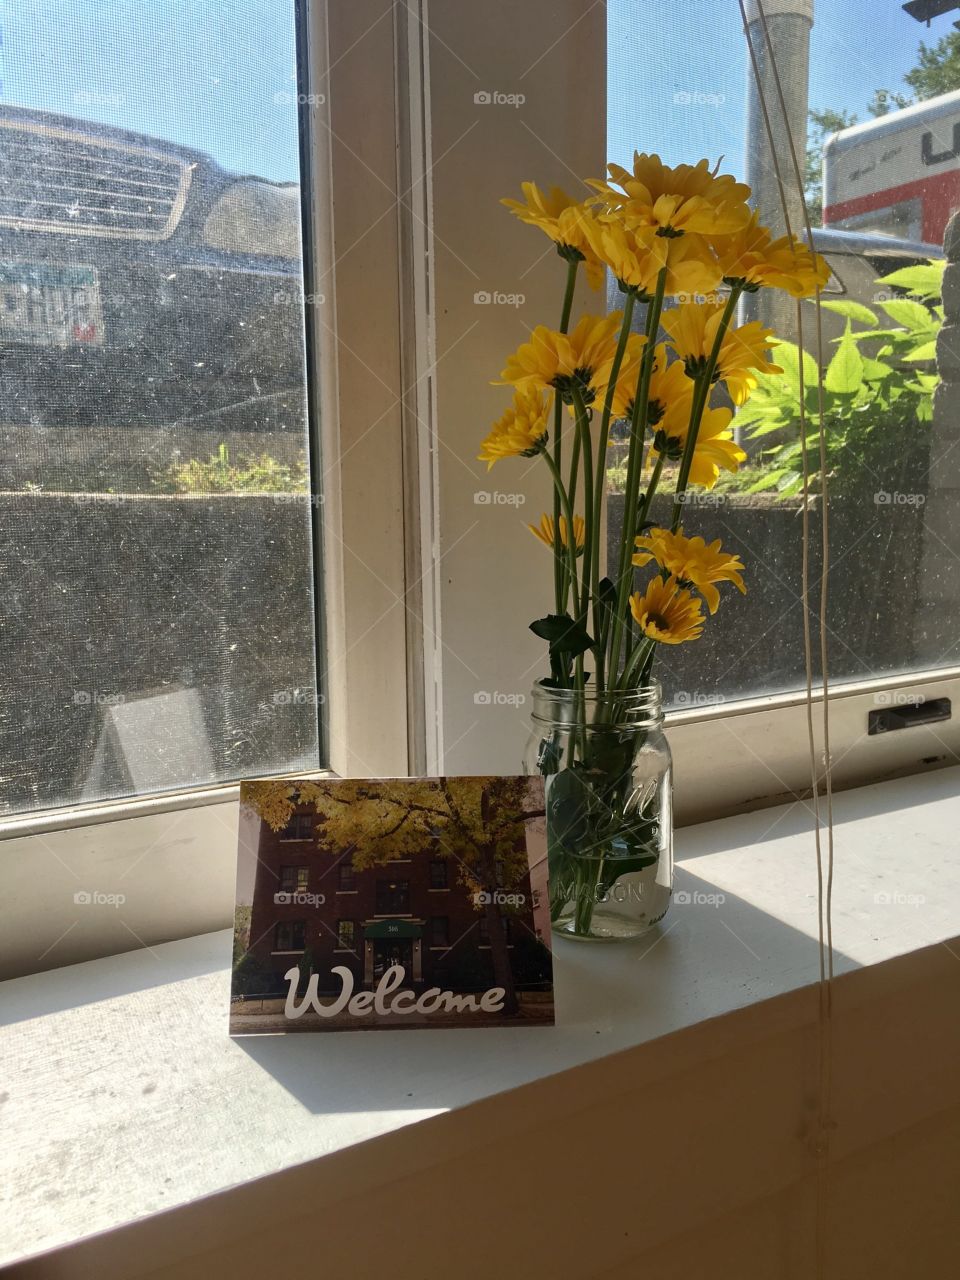 Flowers and a welcome to the neighborhood card